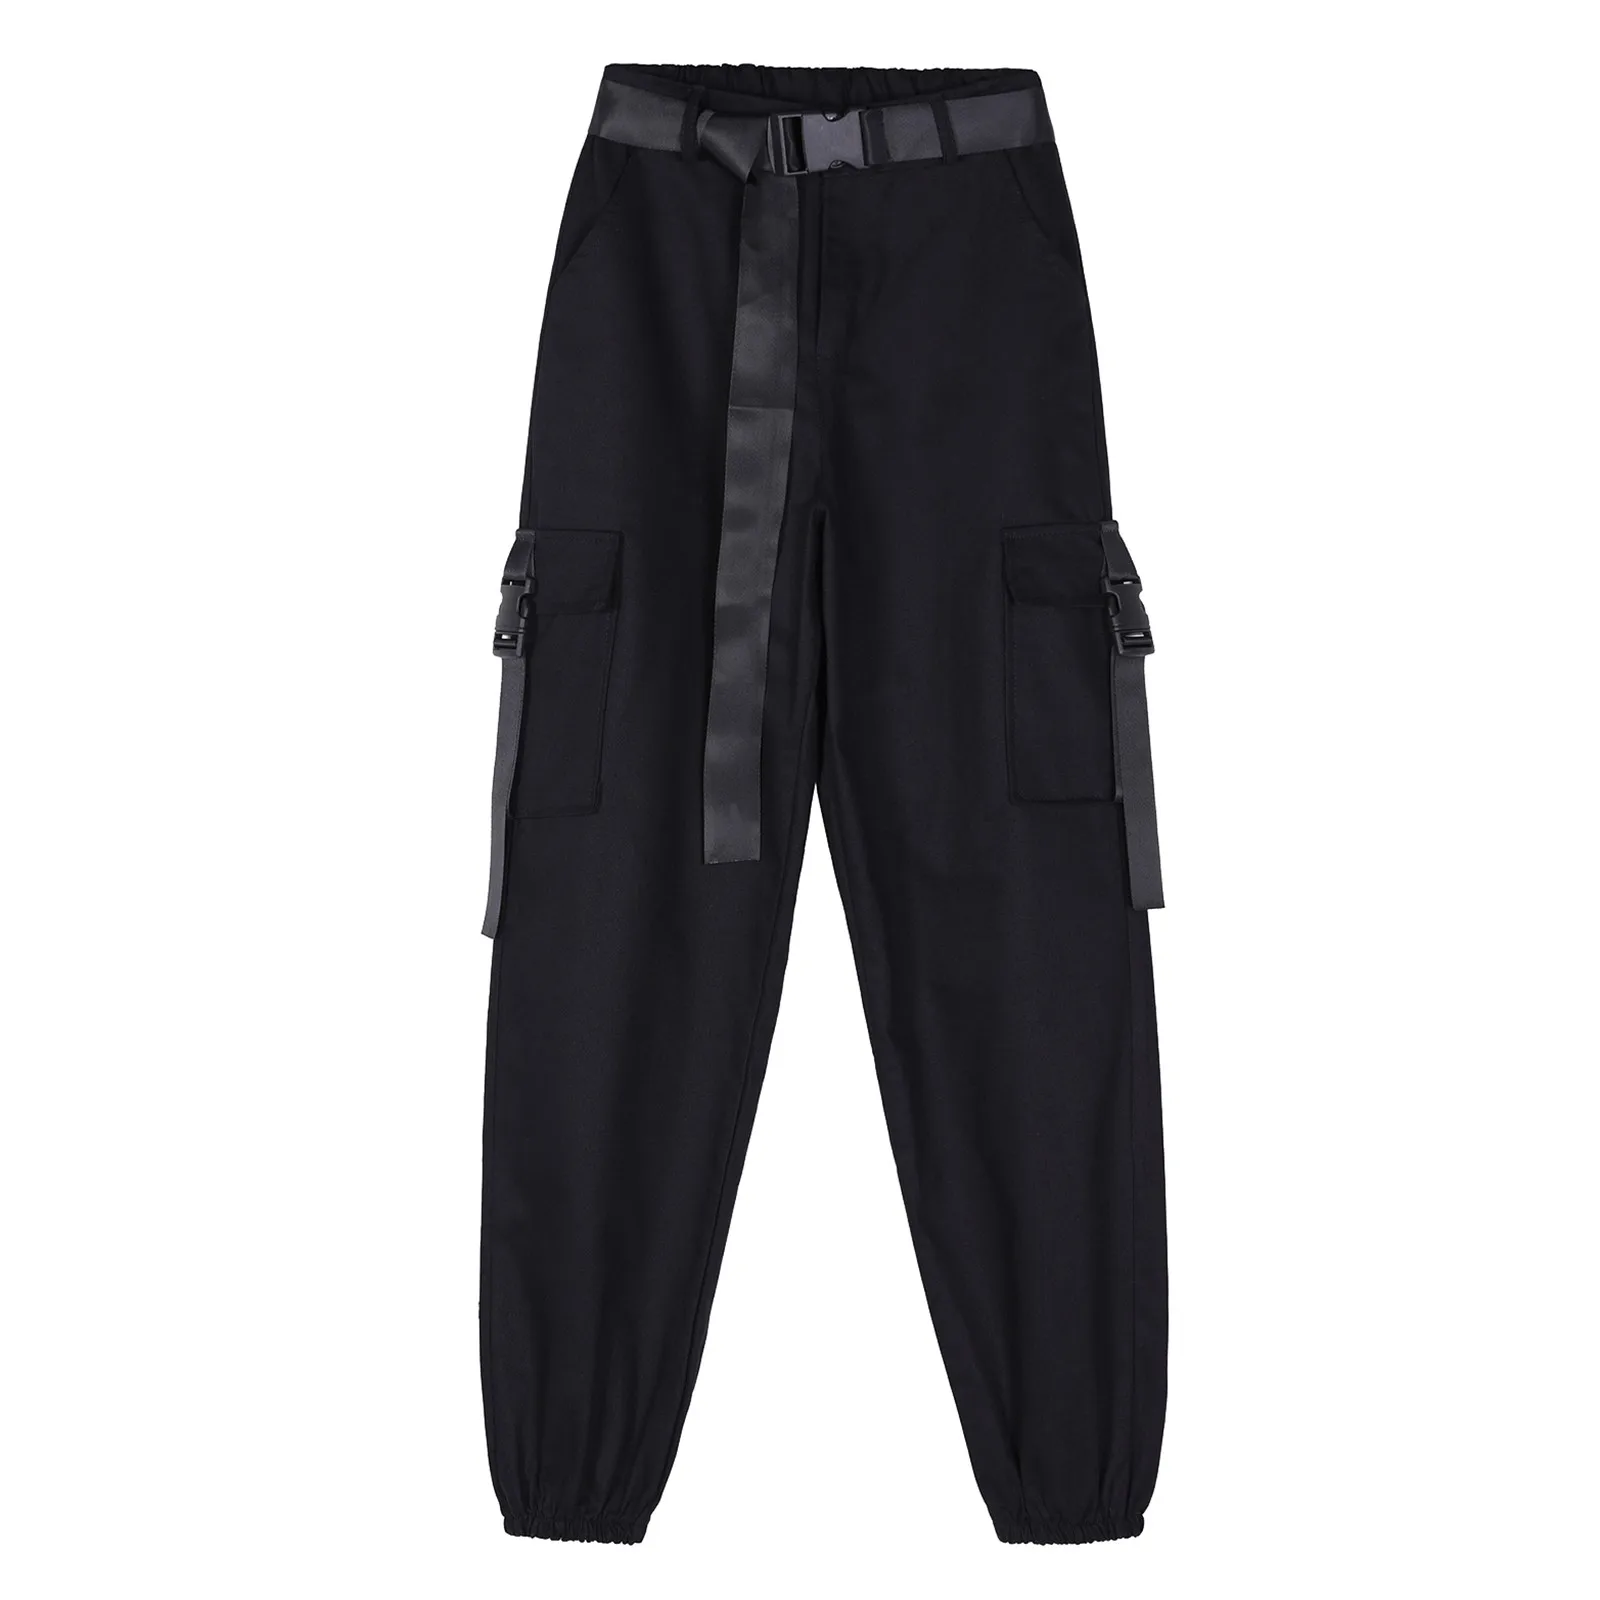 

Women Baggy Pant Cargo Pocket Pants Casual Streetwear Solid Jogger Pants With Belt Combat Twill Trousers trouser pants Casual